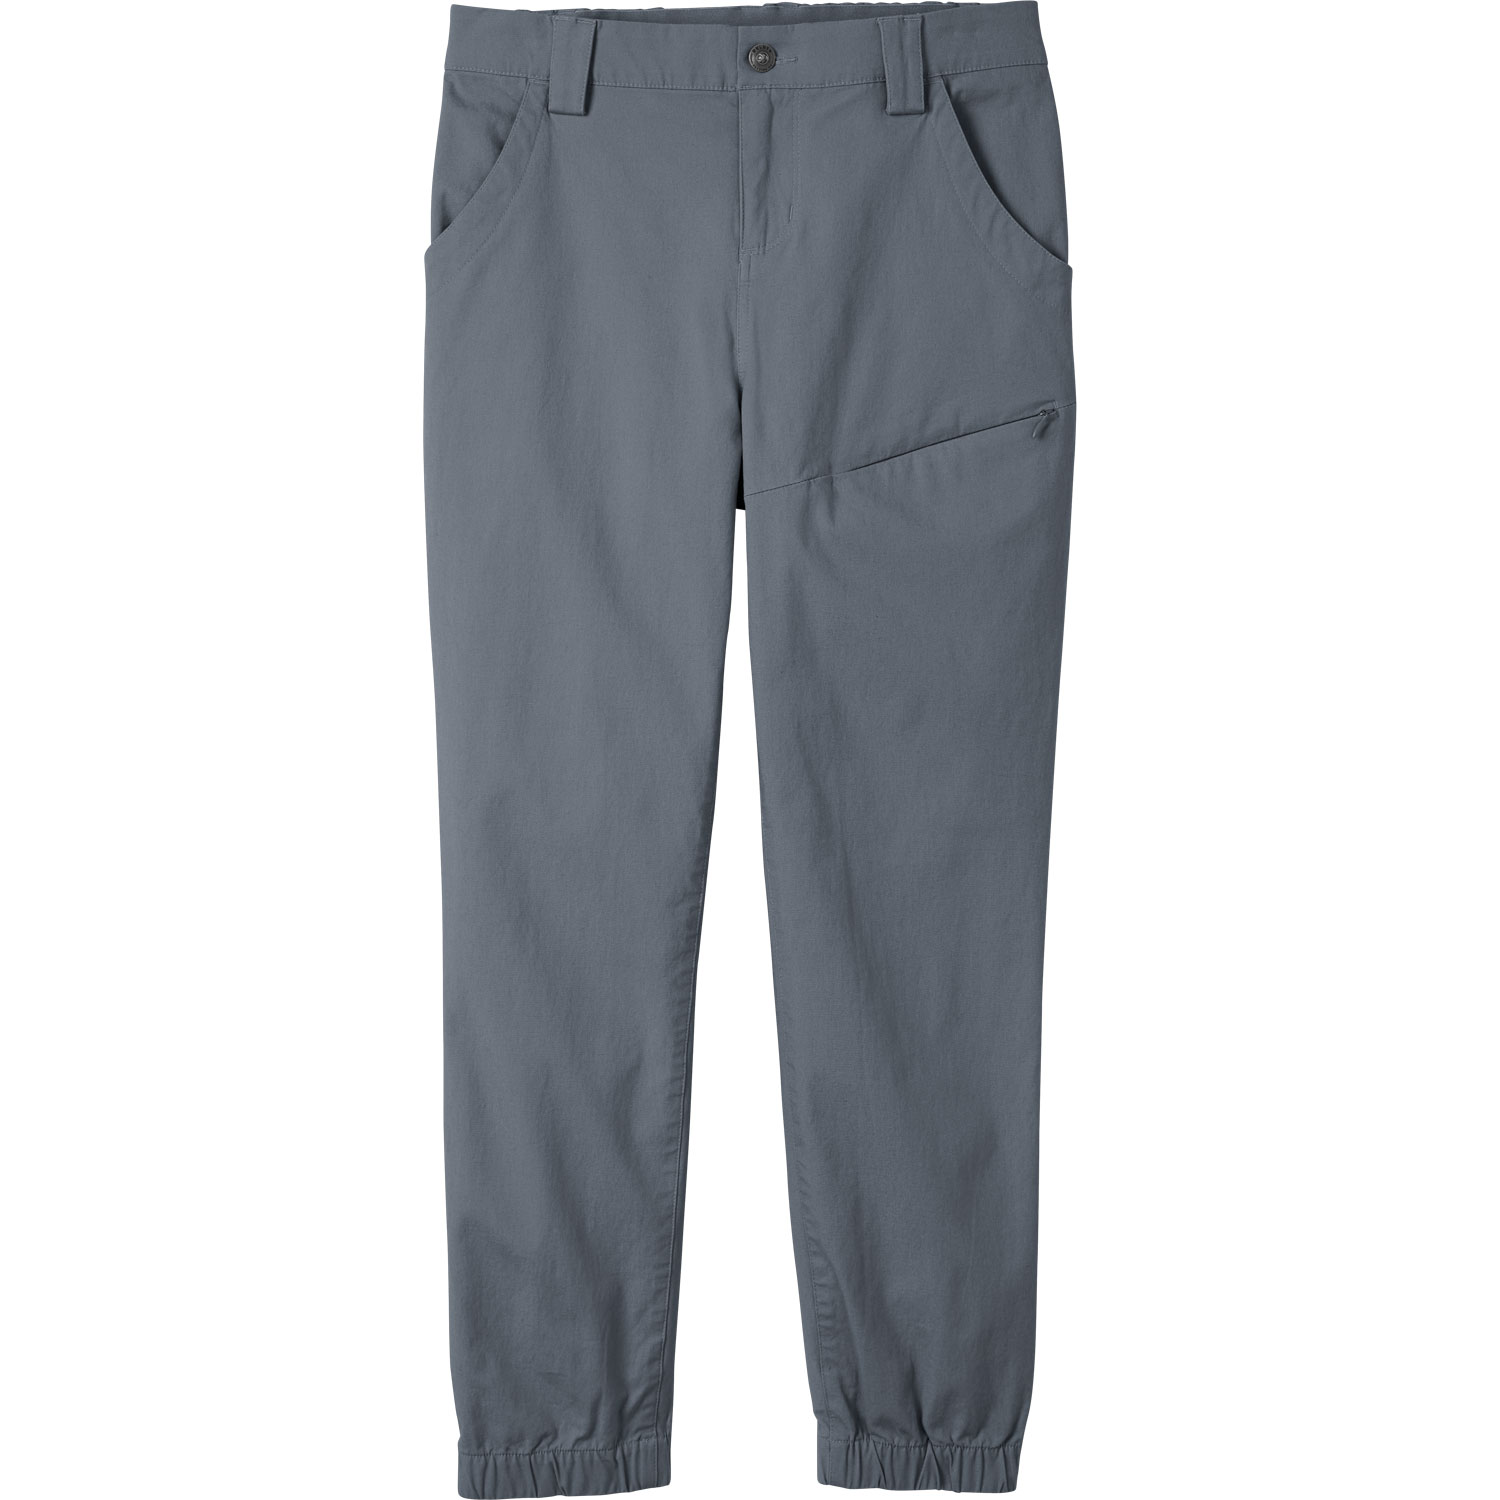 Women's Rootstock Gardening Jogger | Duluth Trading Company